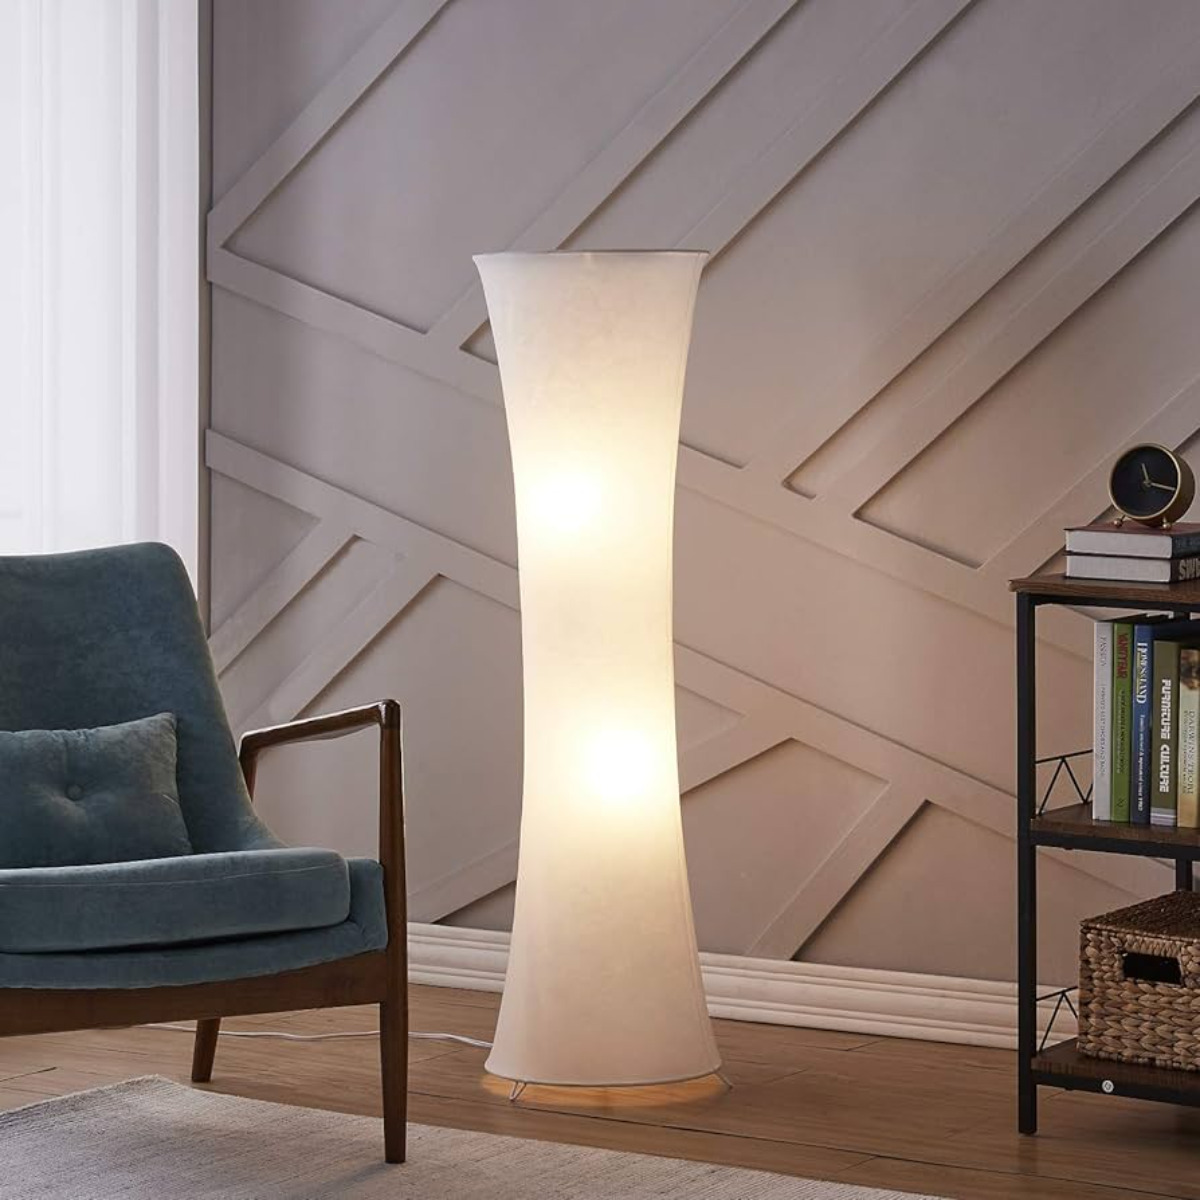 How To Make A Floor Lamp